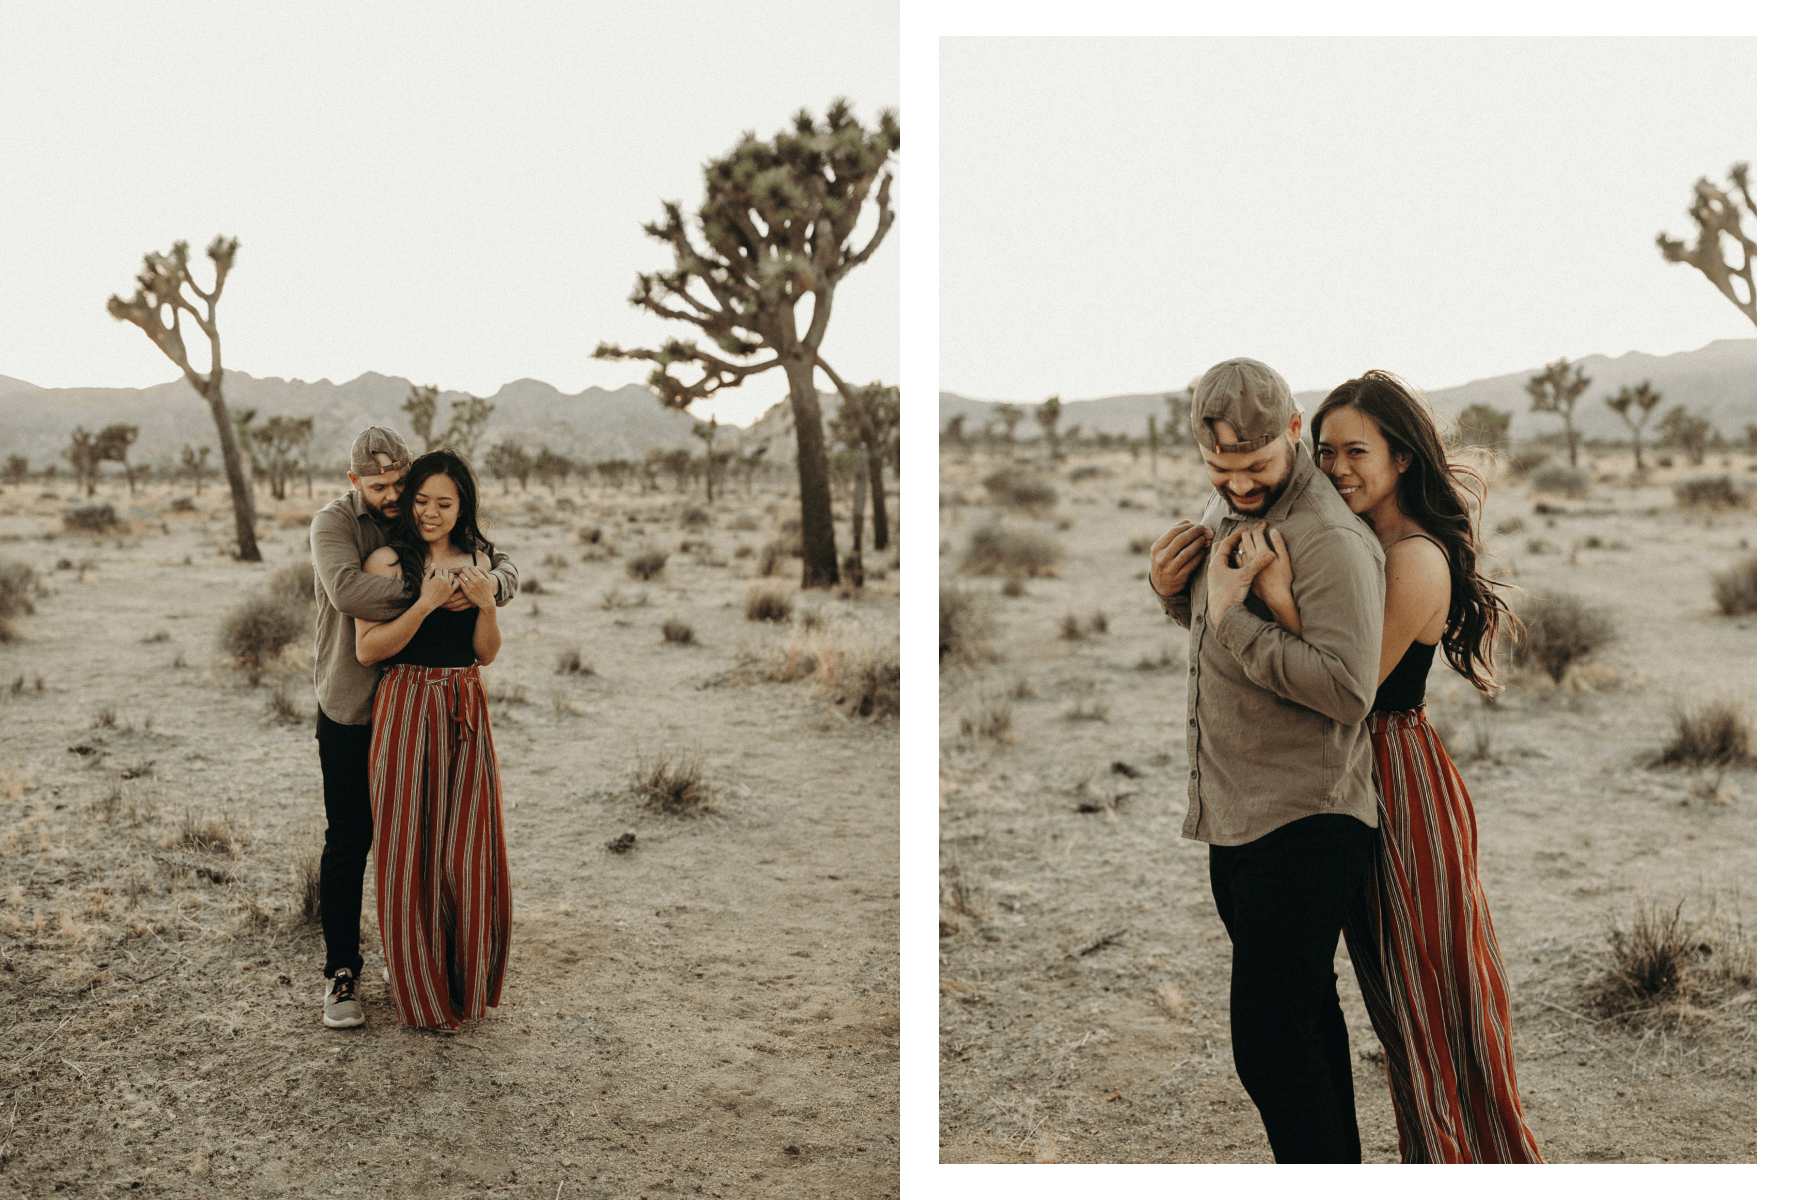 sweet engagement session